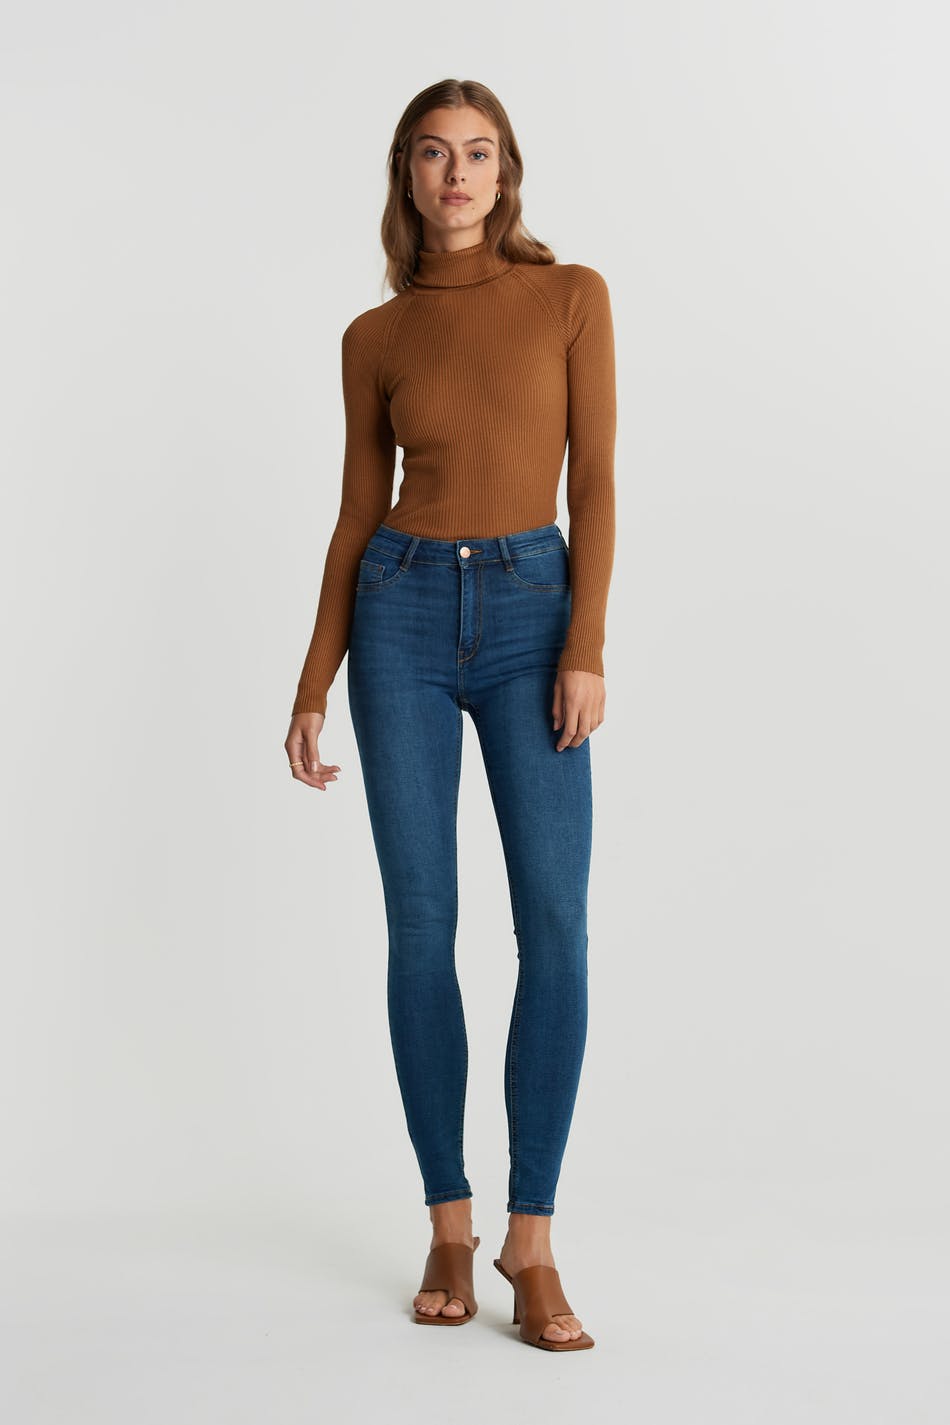 molly high waist jeans gina tricot